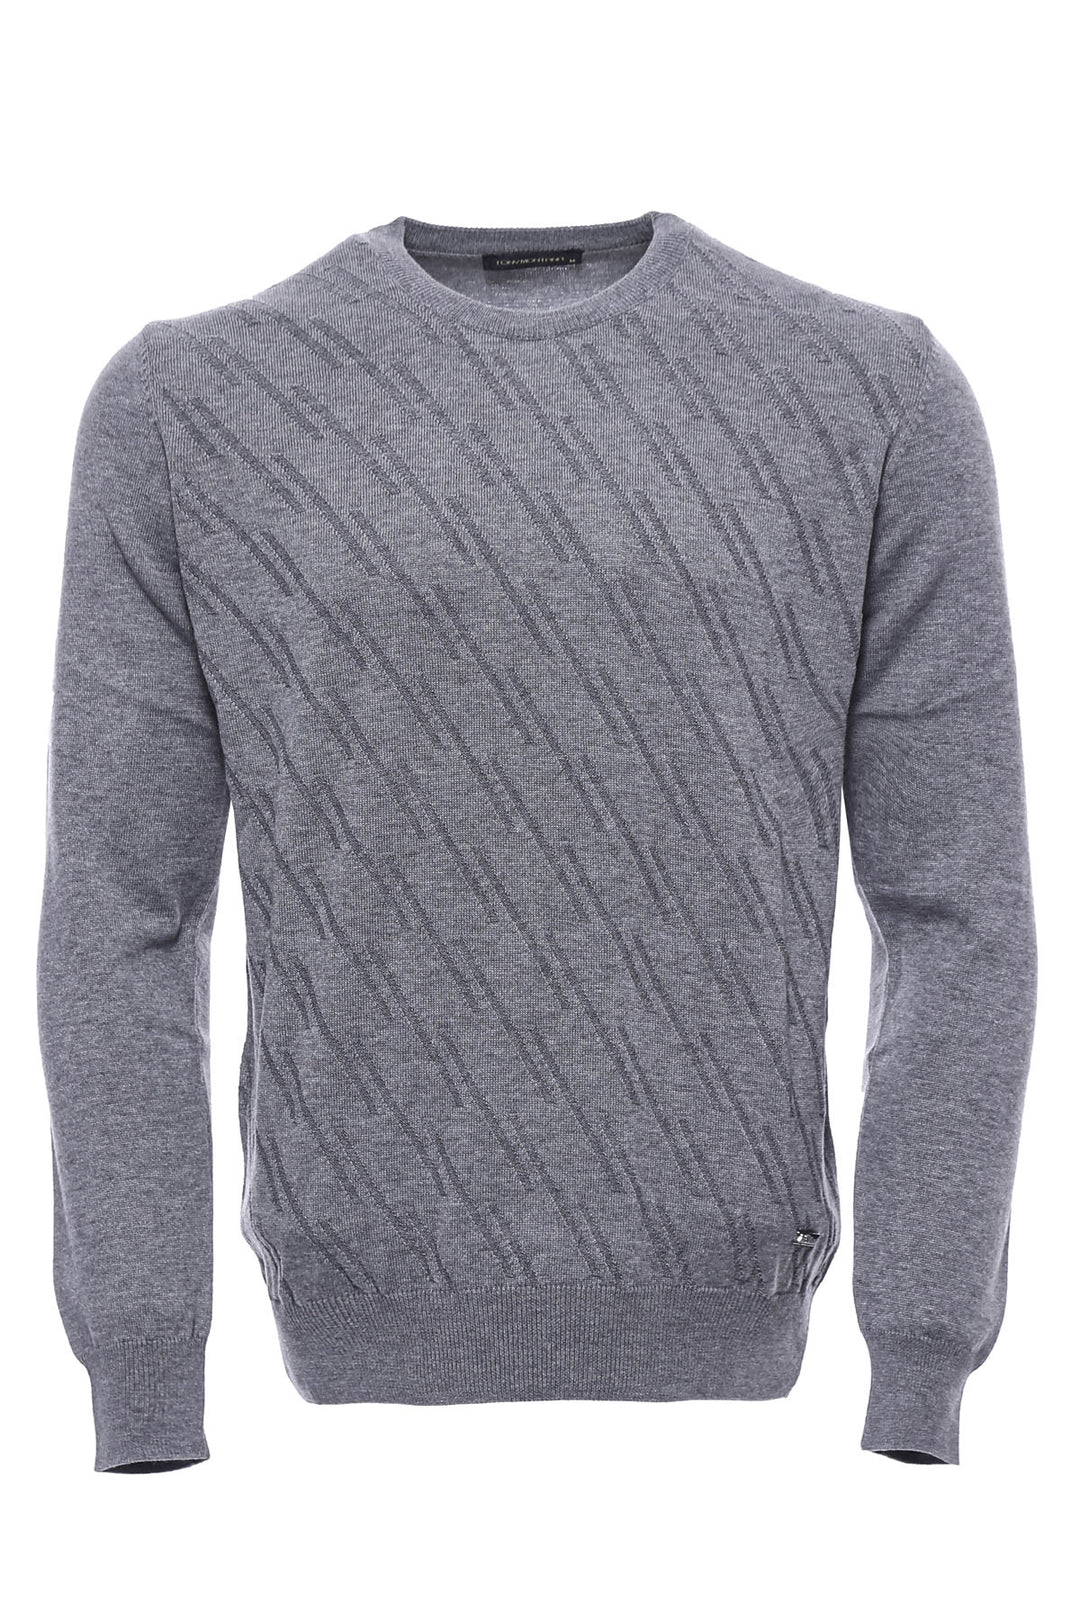 Grey Patterned Circle Neck Sweater - Wessi